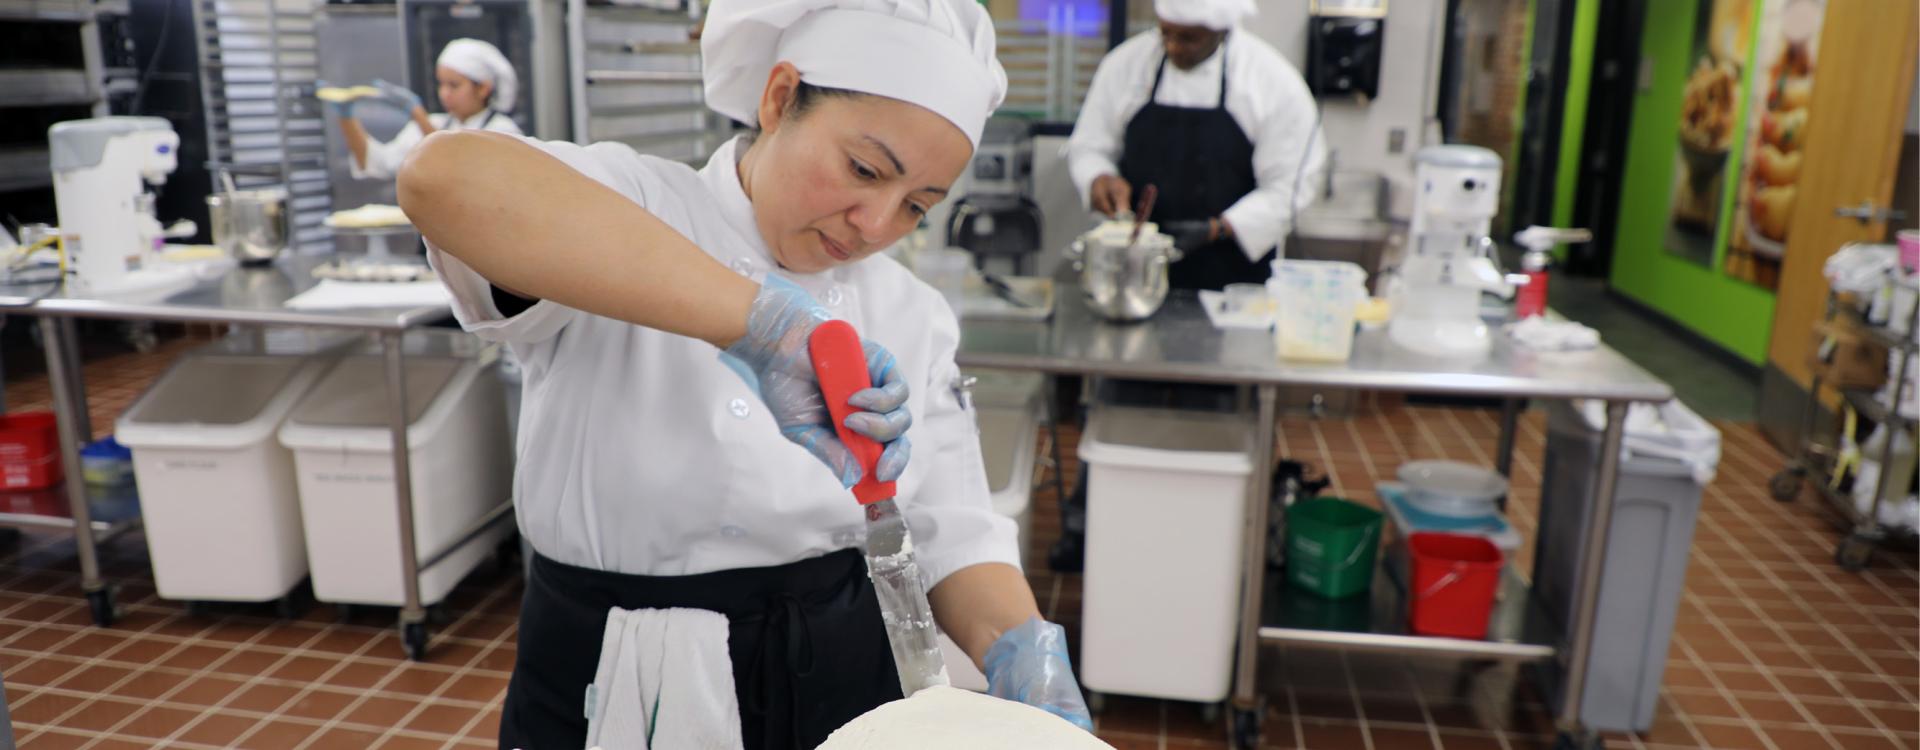 culinary student frosts a cake in the professional kitchen